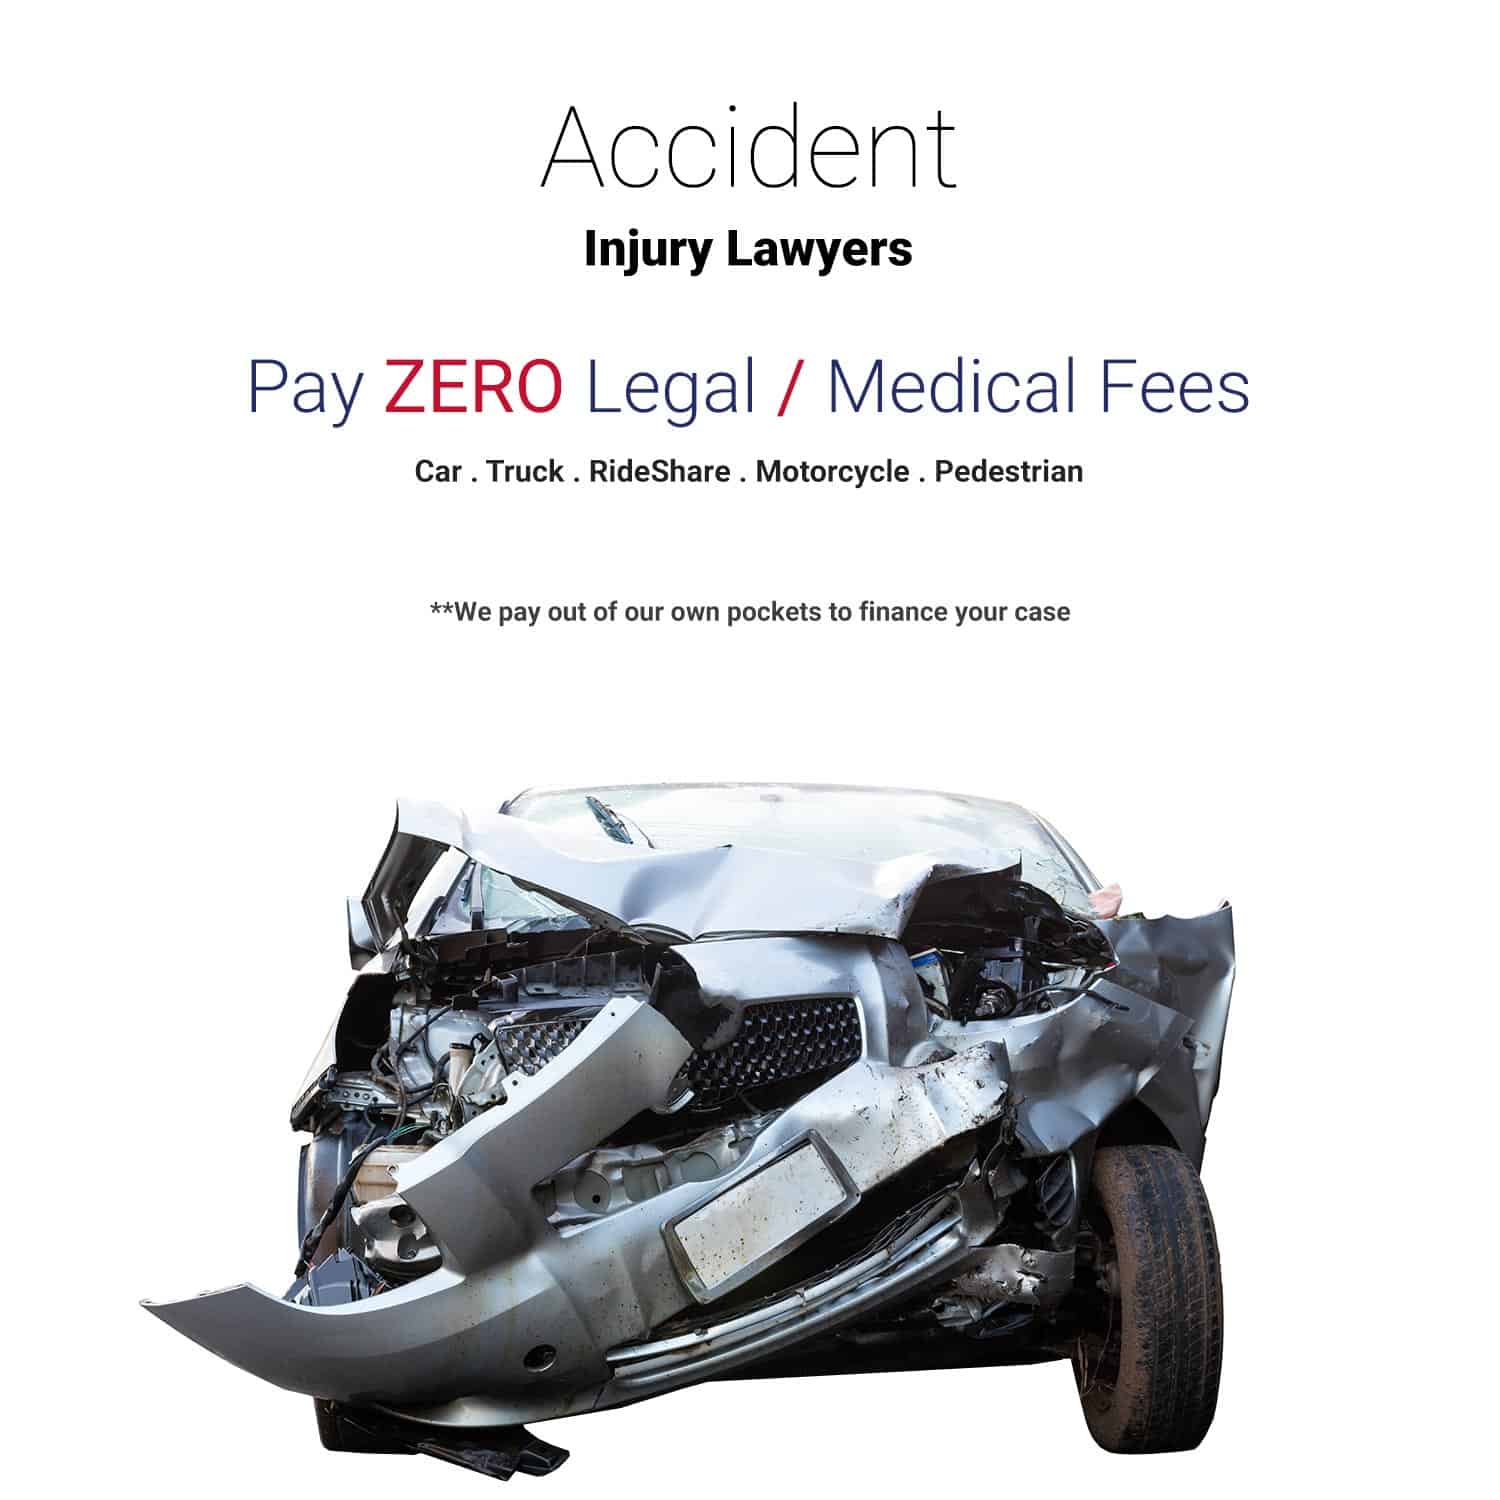 Pay ZERO Legal / Medical Fees